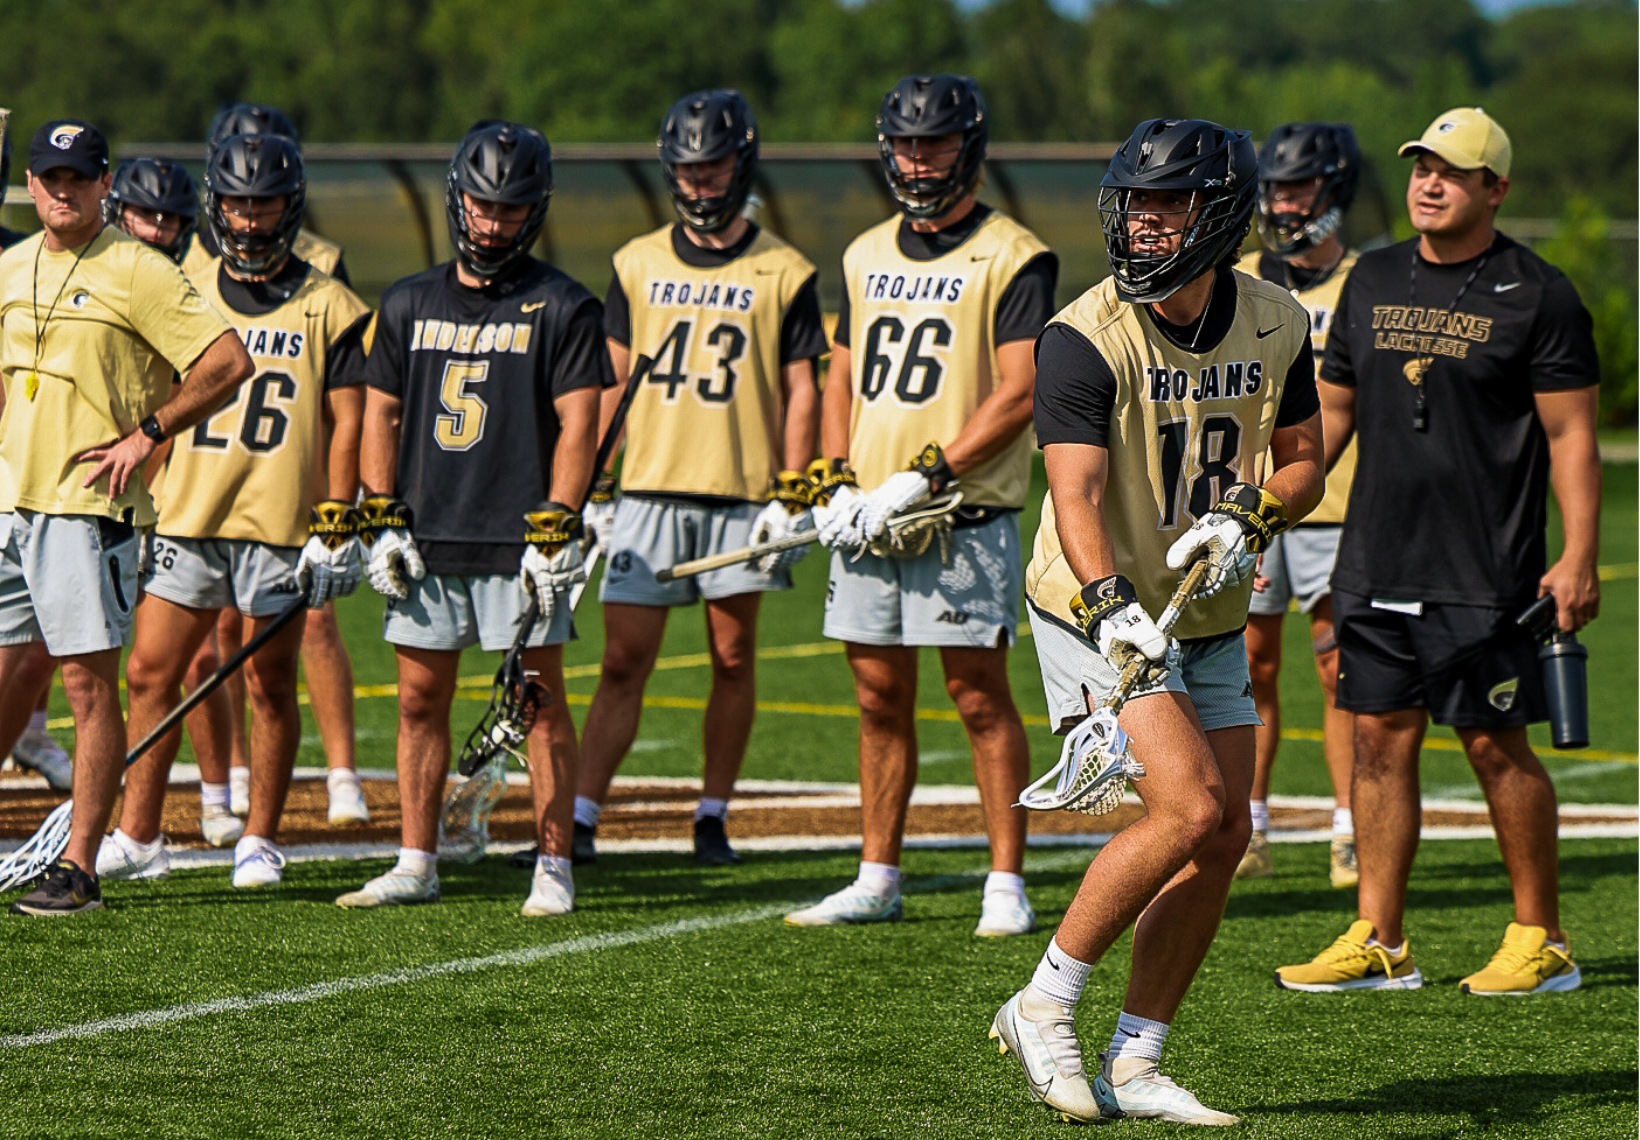 Men’s Lacrosse Opens Conference Play at Lenoir-Rhyne